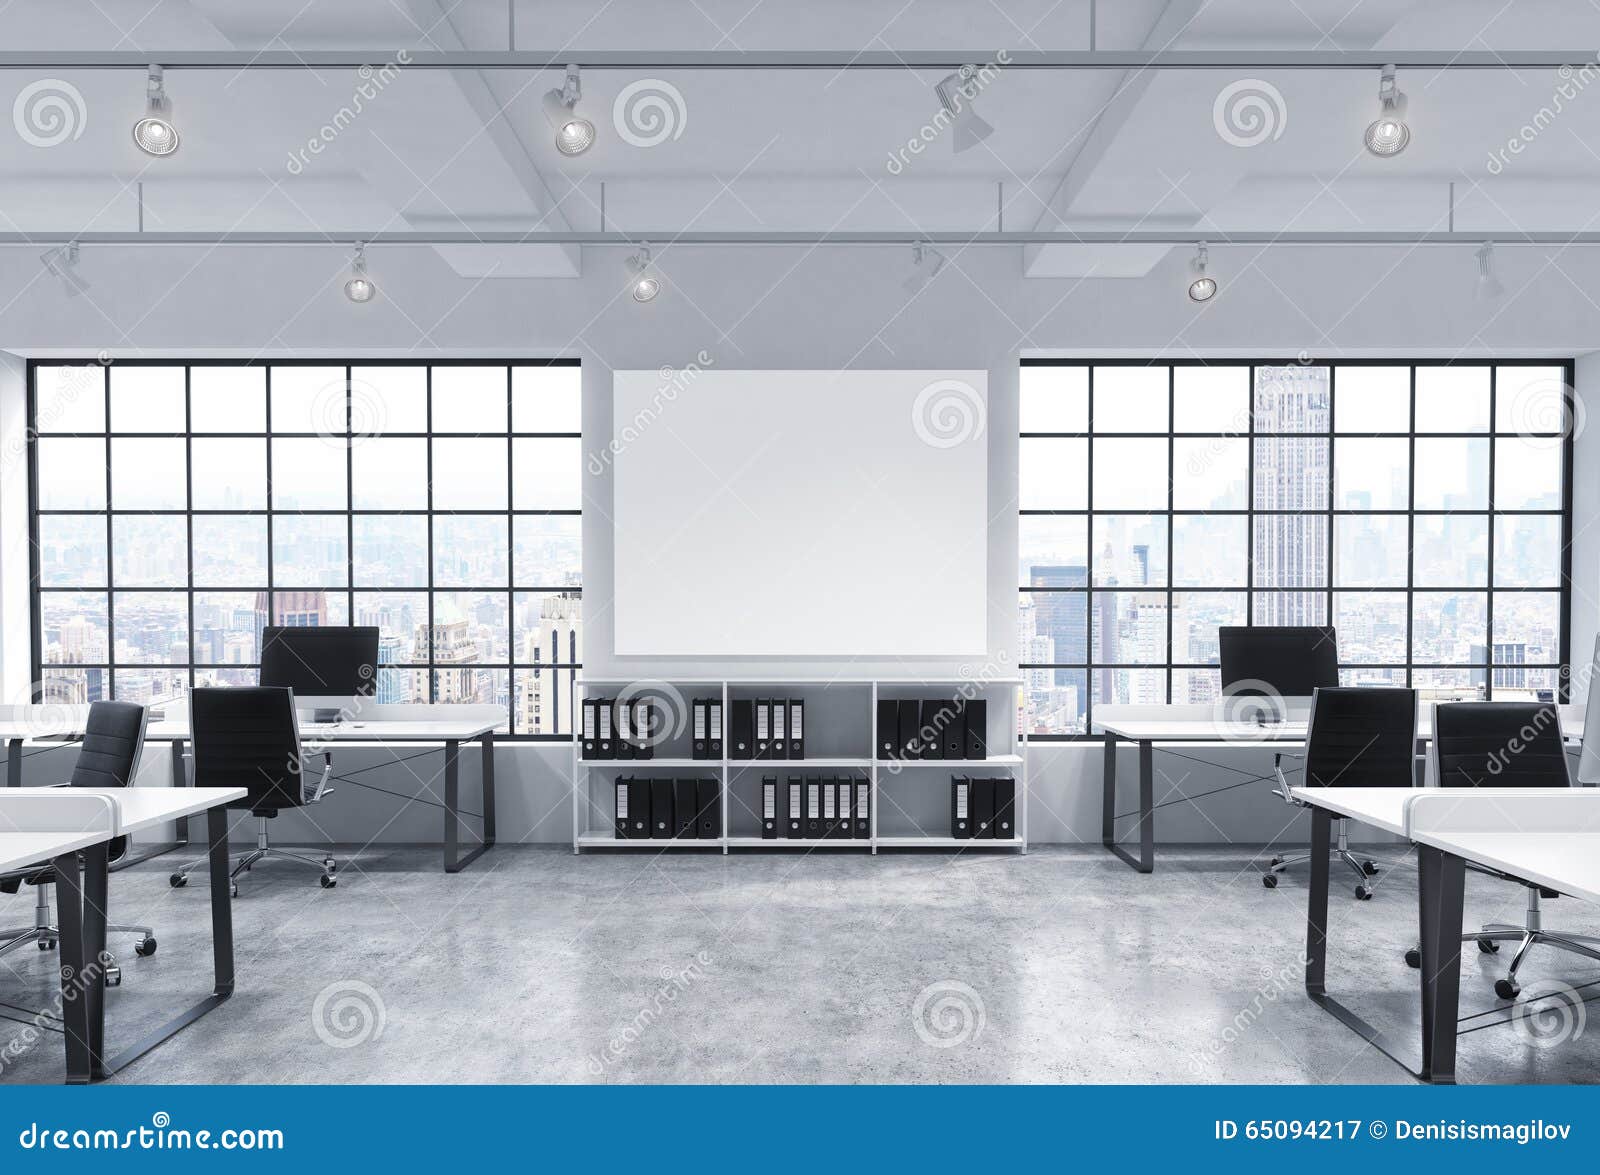 Open Space Office Stock Photo - Image: 65094217